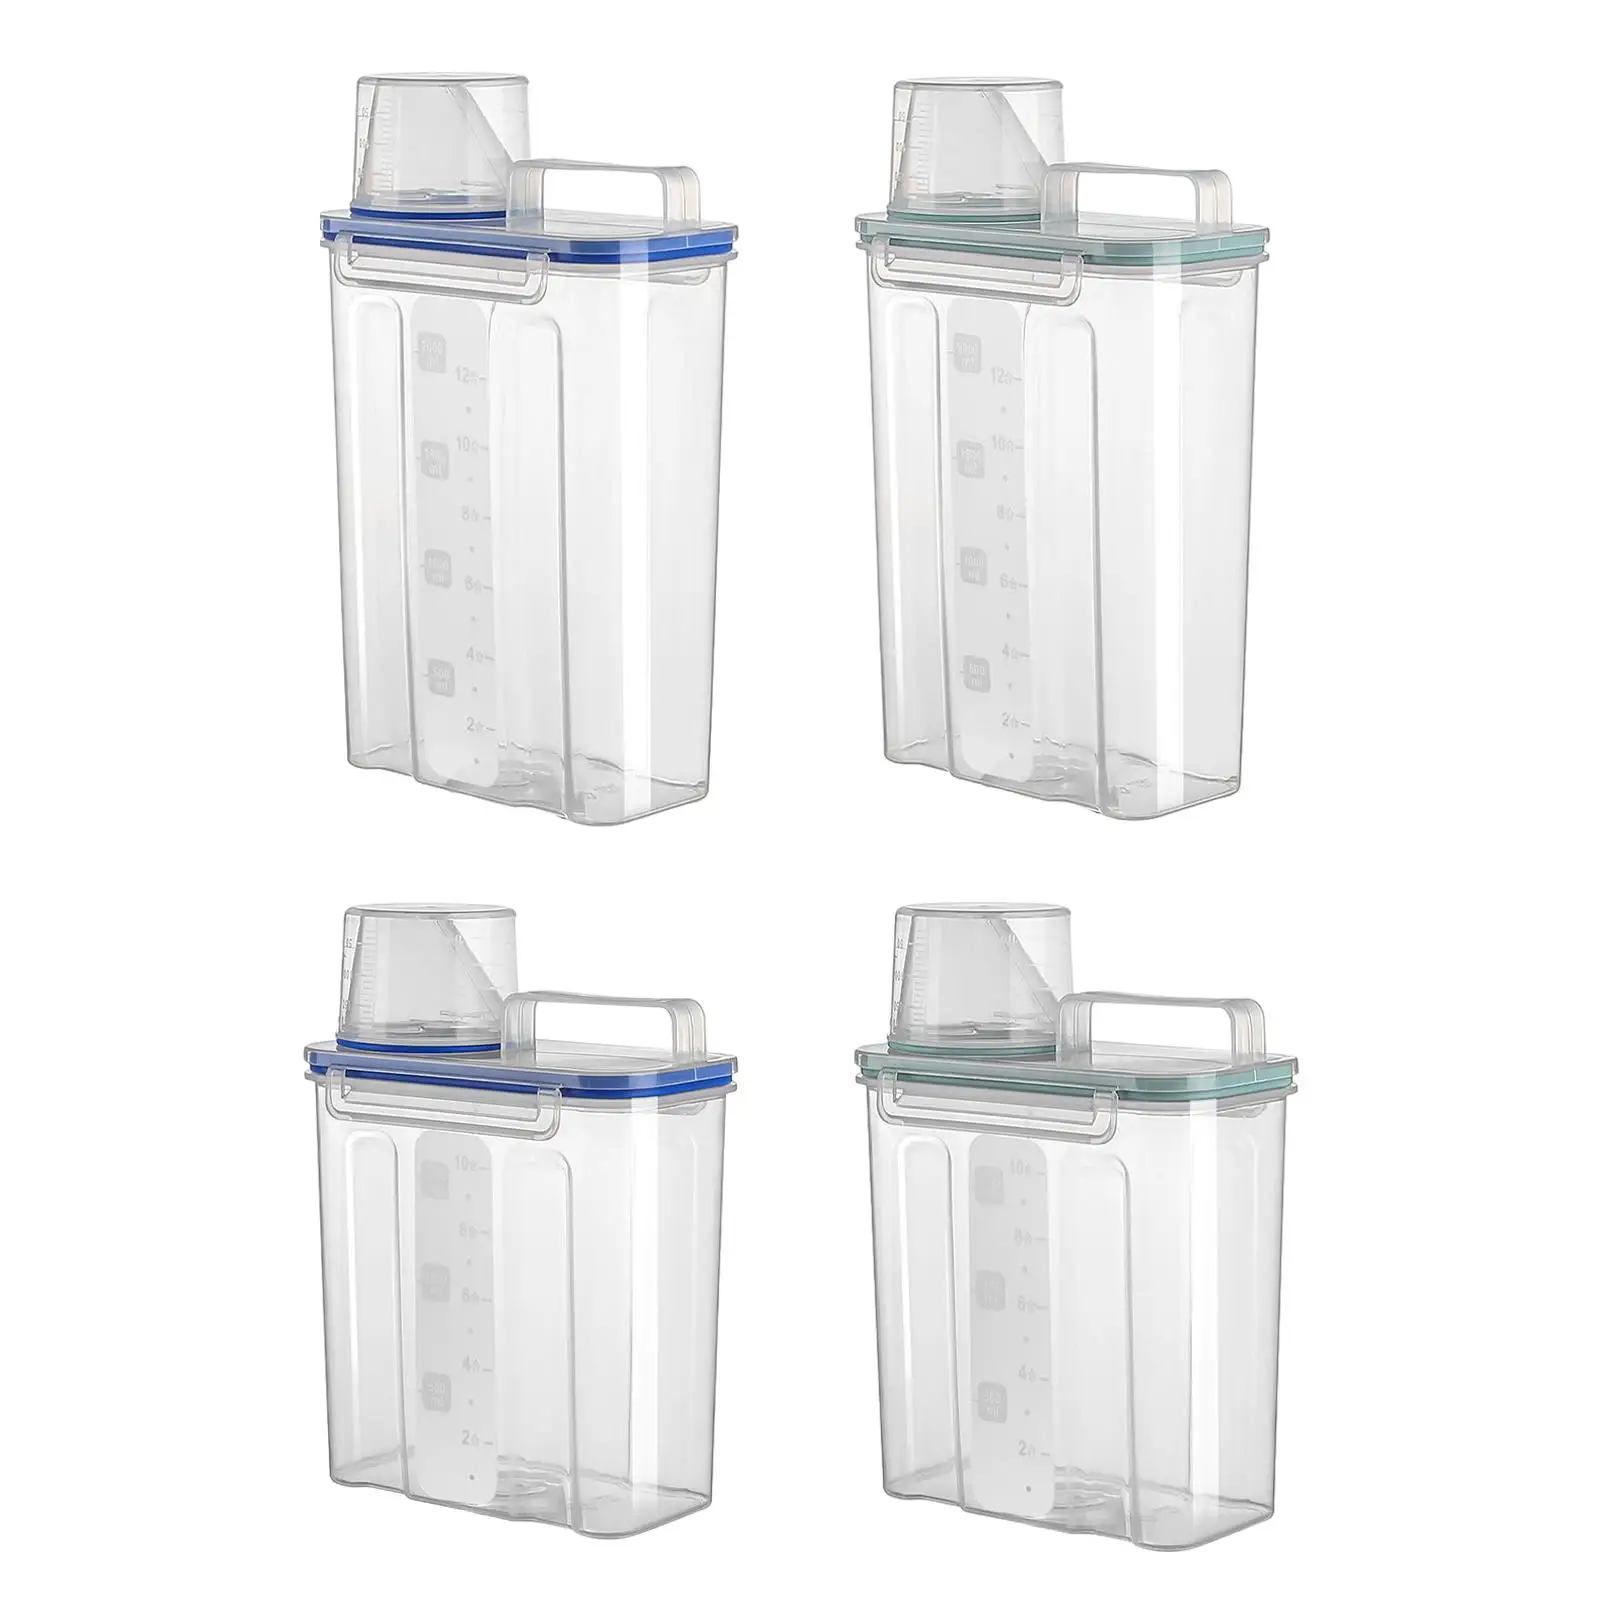 Laundry Detergent Holder with Lids Farmhouse Transparent Laundry Room Organization Multifunctional with Scale Rice Dispenser